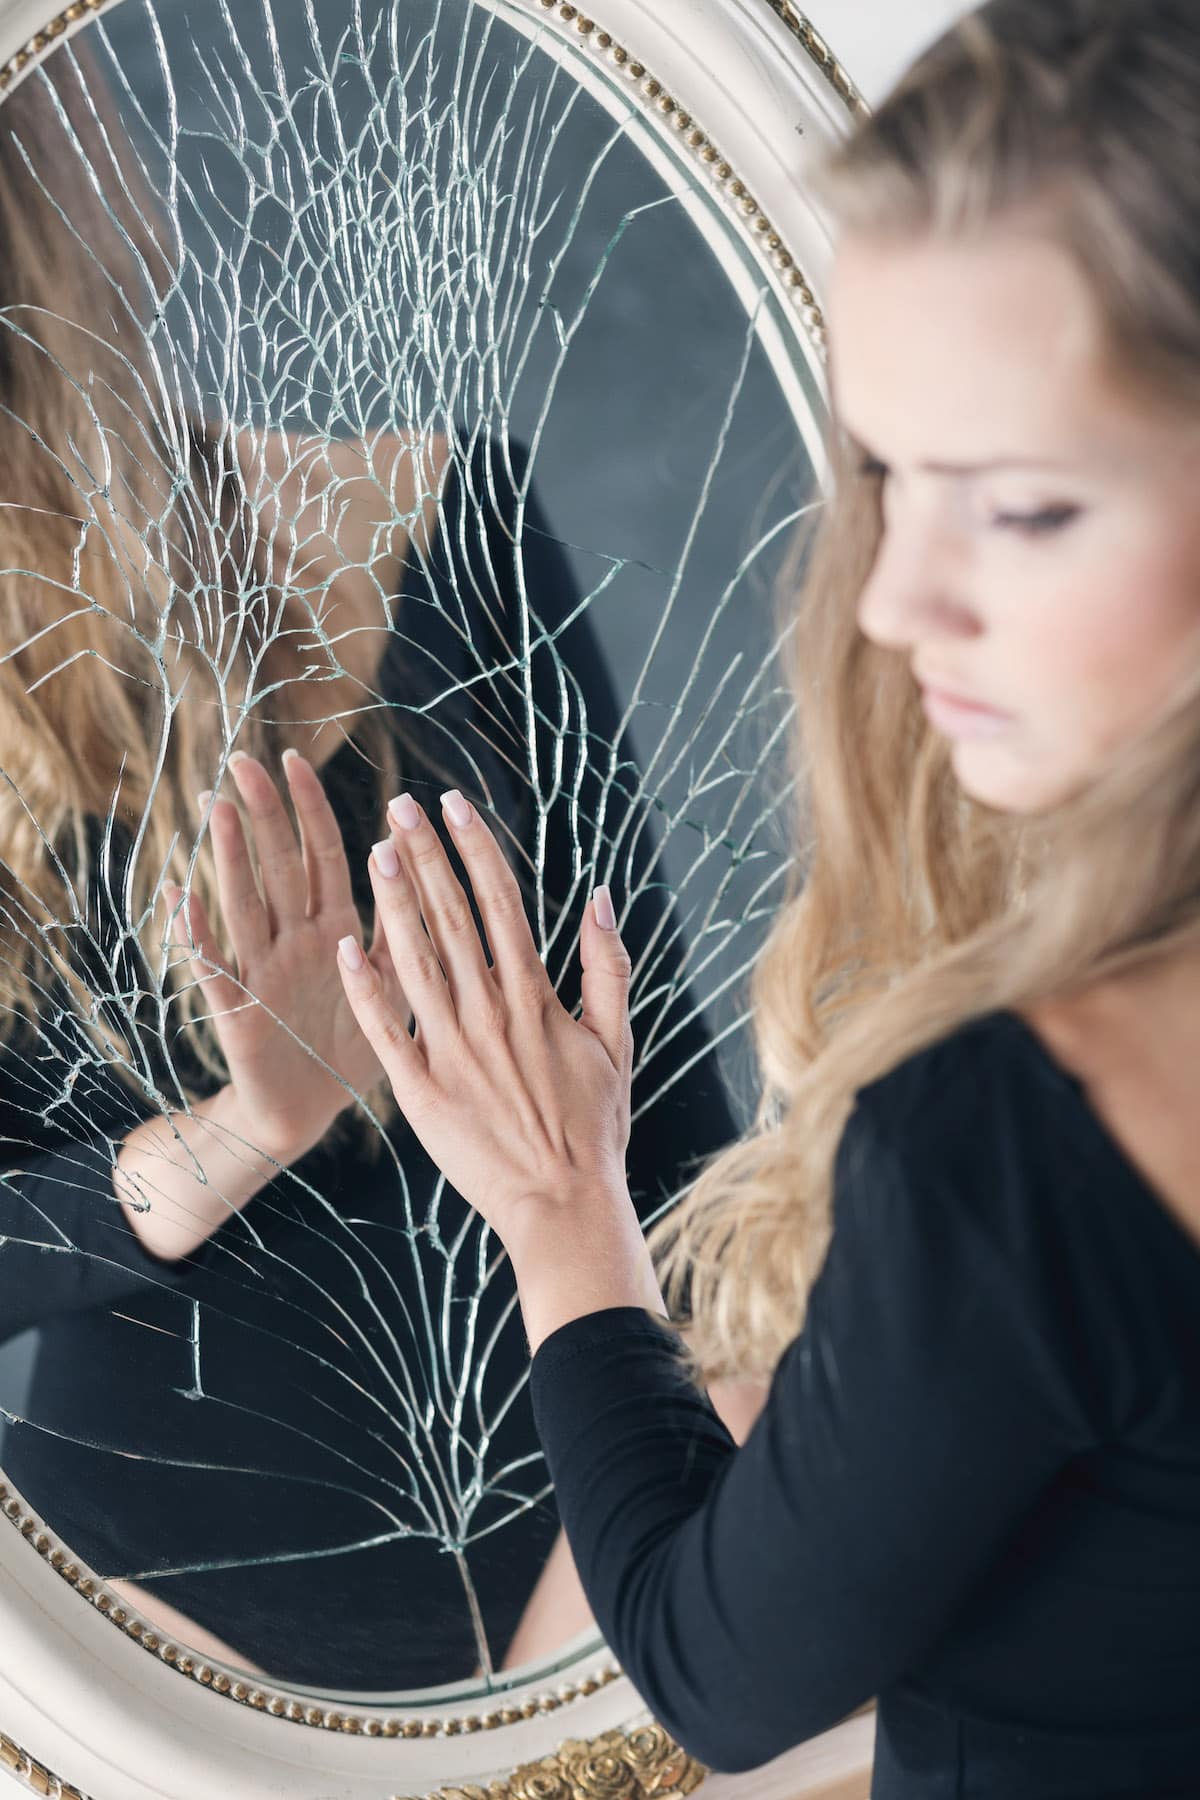 A woman in black asking "Am I a toxic person" to a cracked mirror